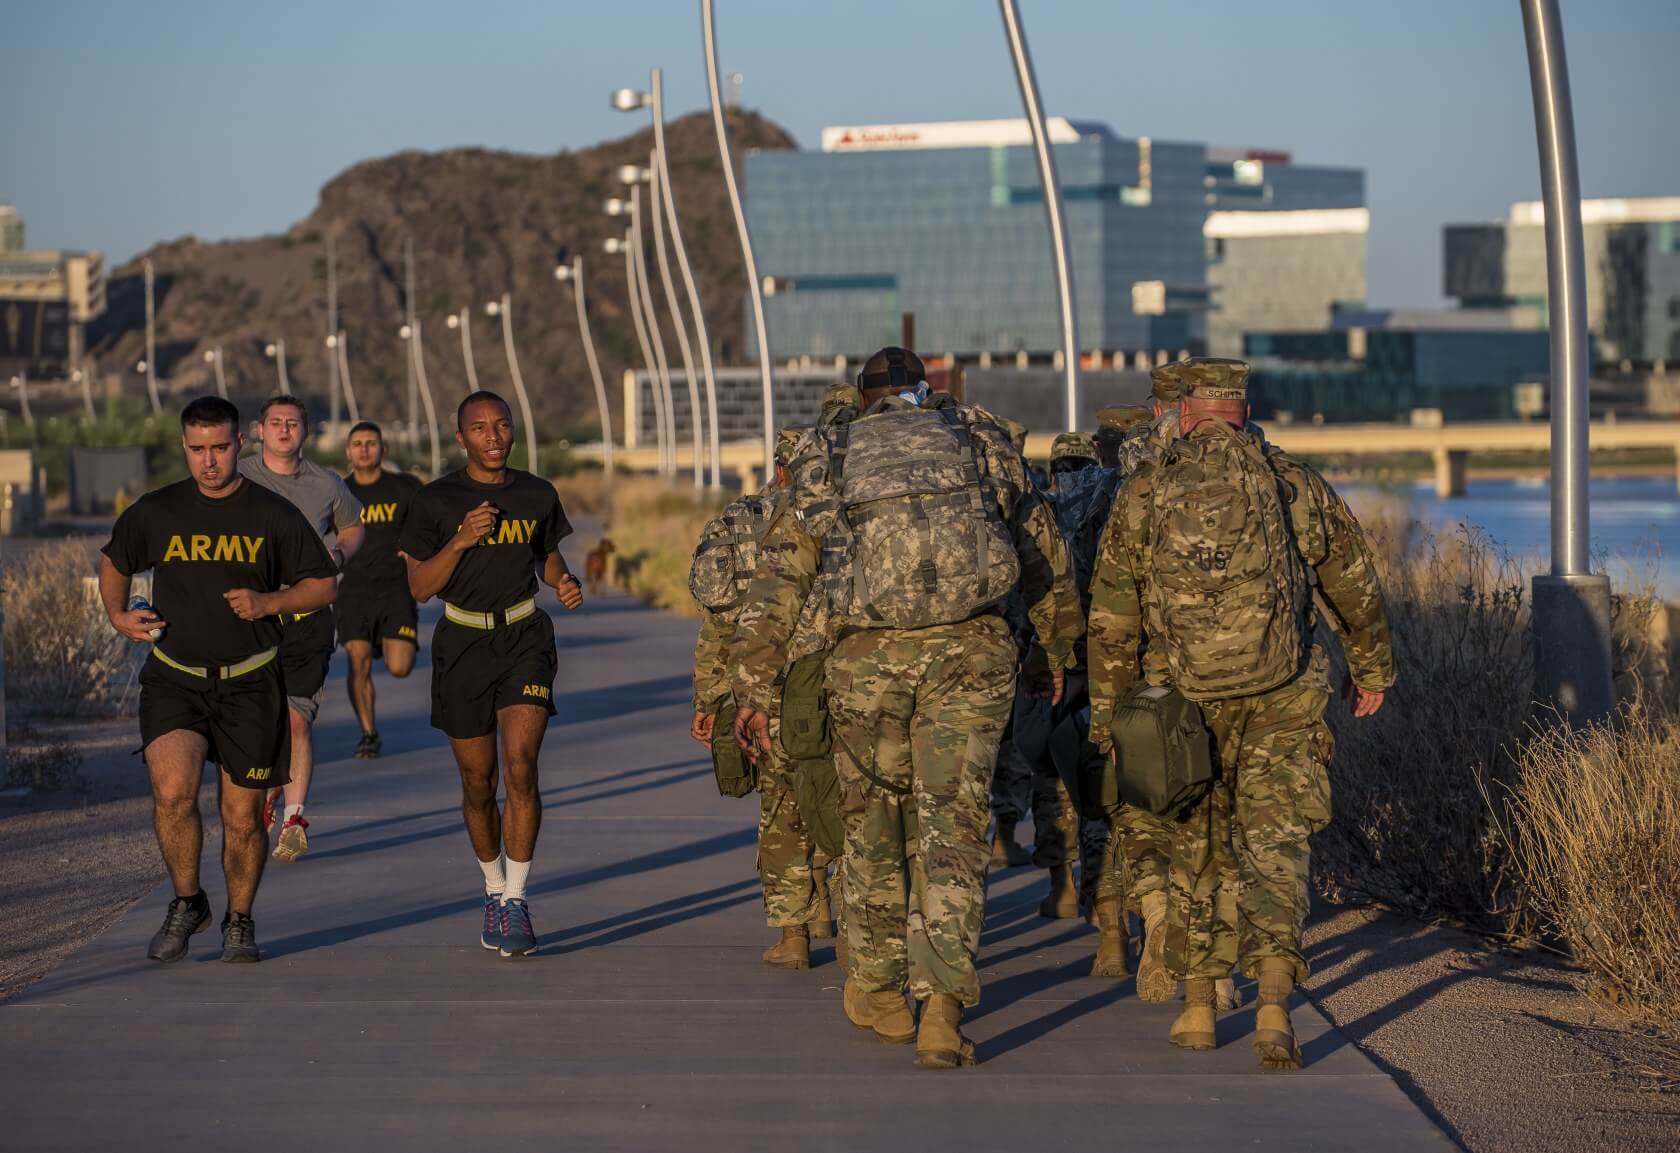 Fitness apps and devices will no longer be allowed at certain military installations